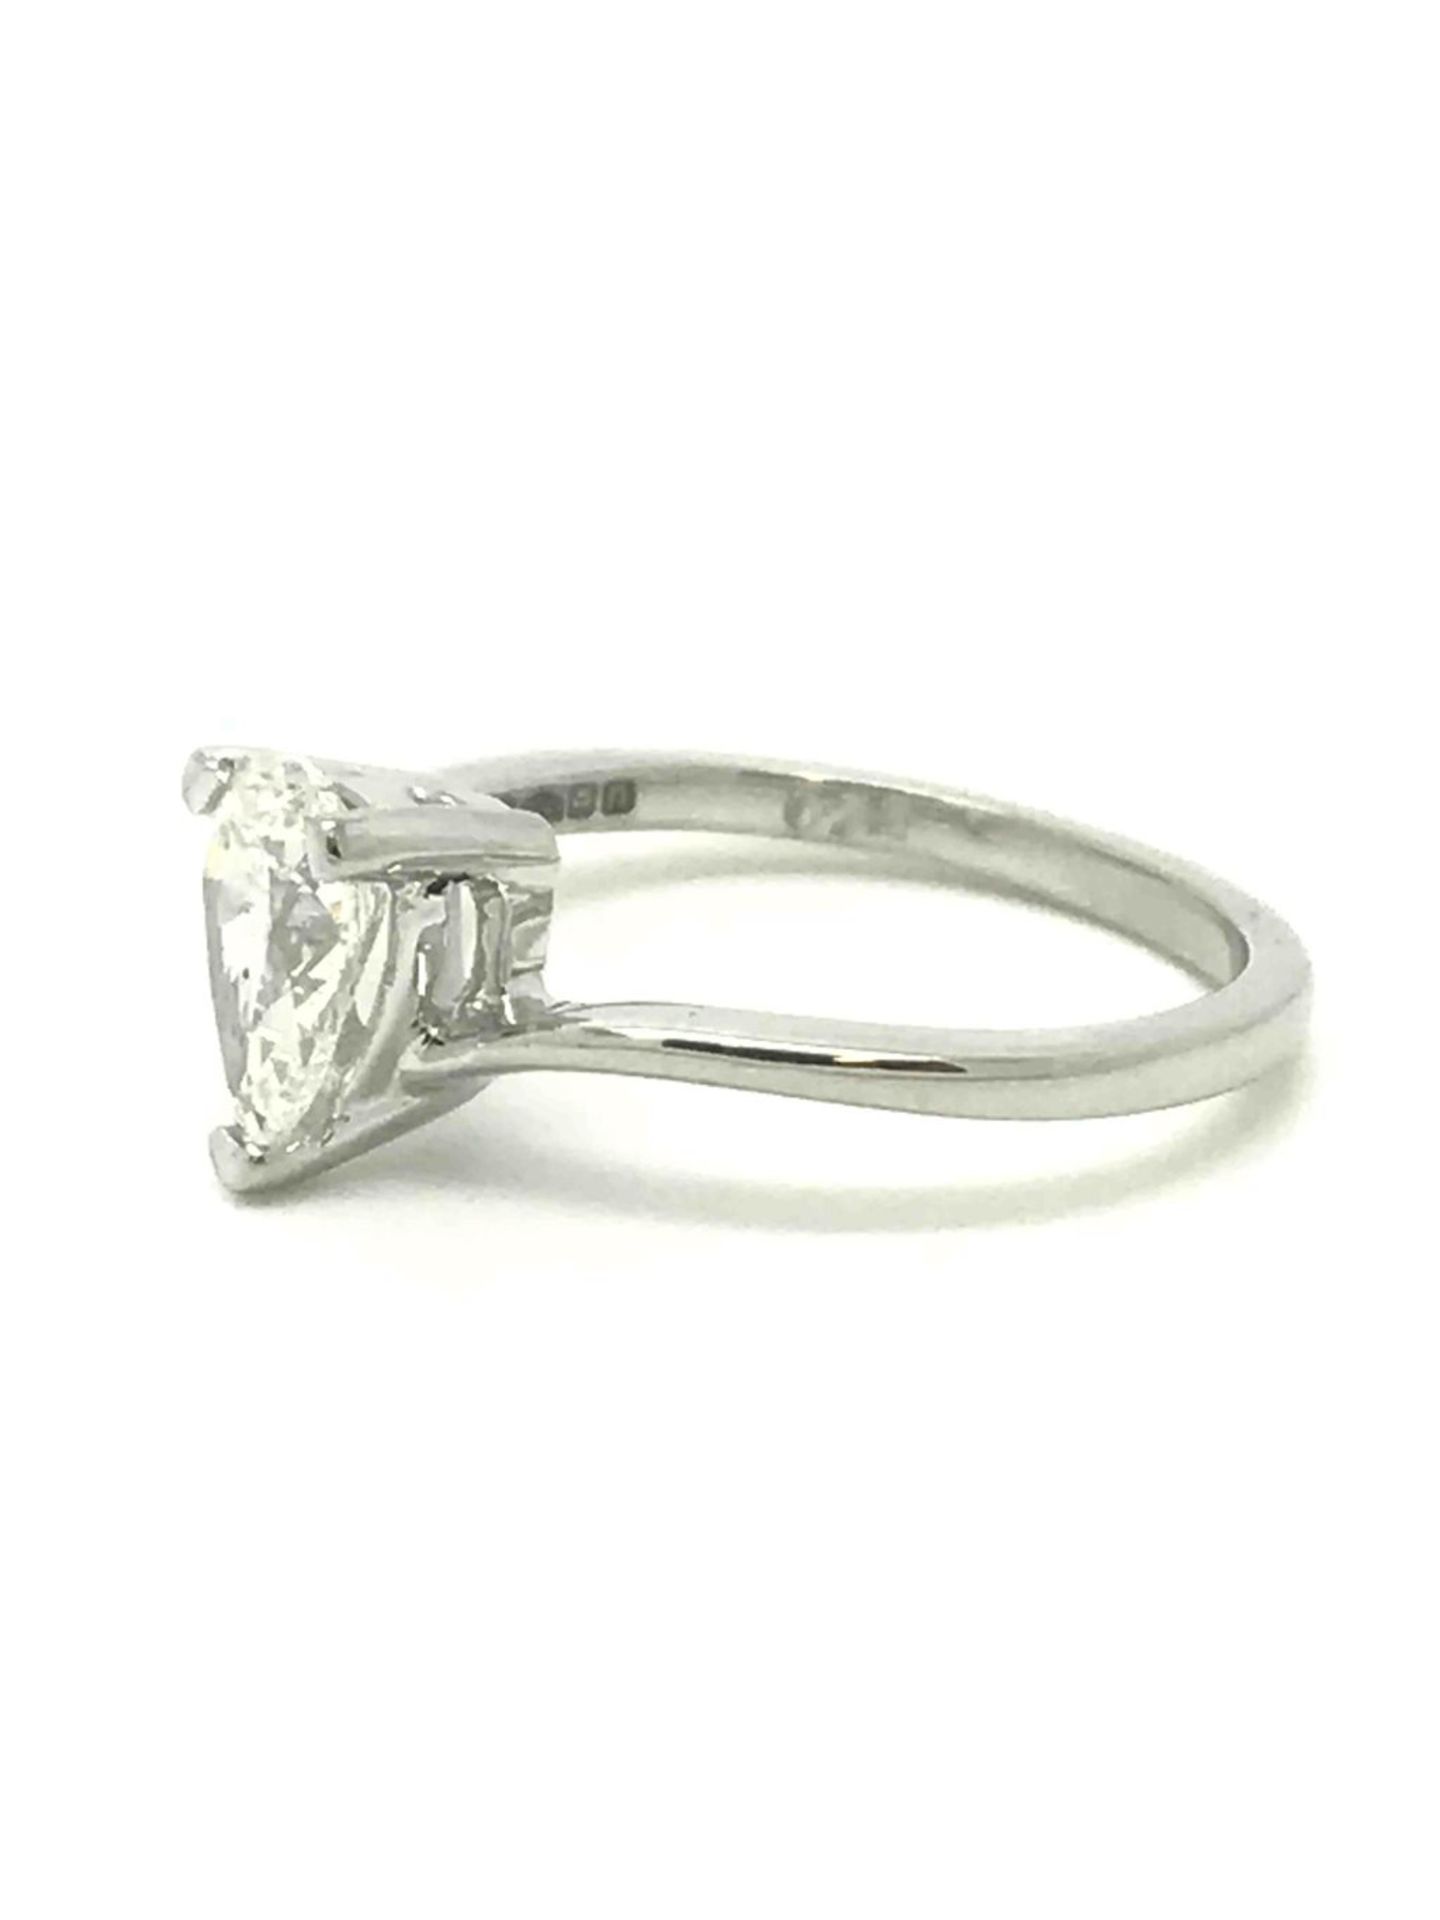 EGL Certificated 0.70ct Pear Cut Diamond Single Stone Ring - Image 2 of 5